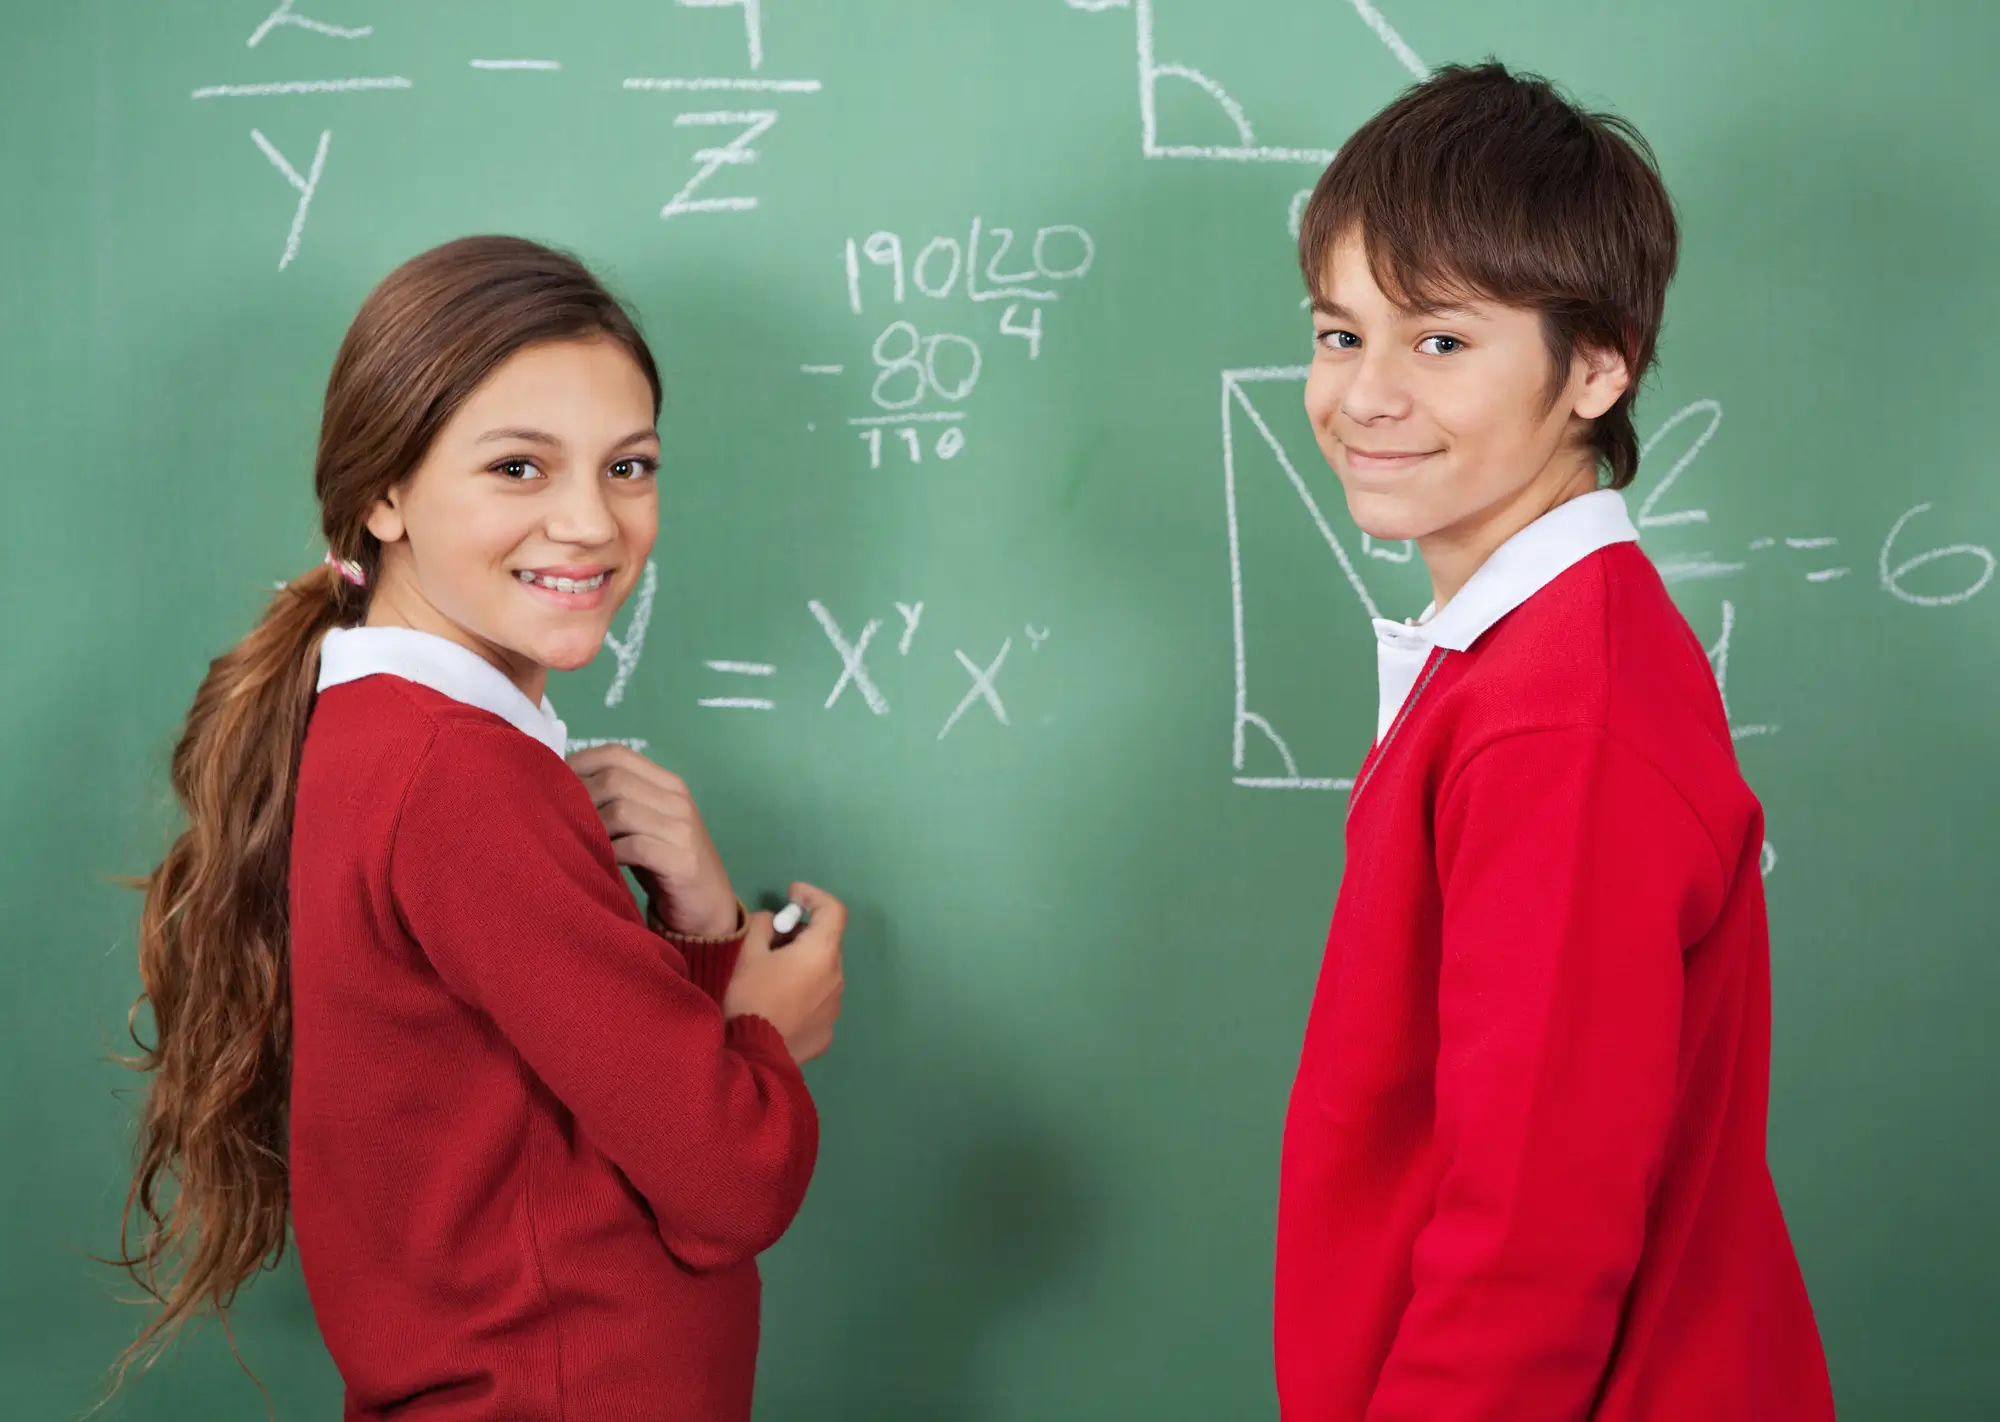 Image of a girl and boy in school uniform